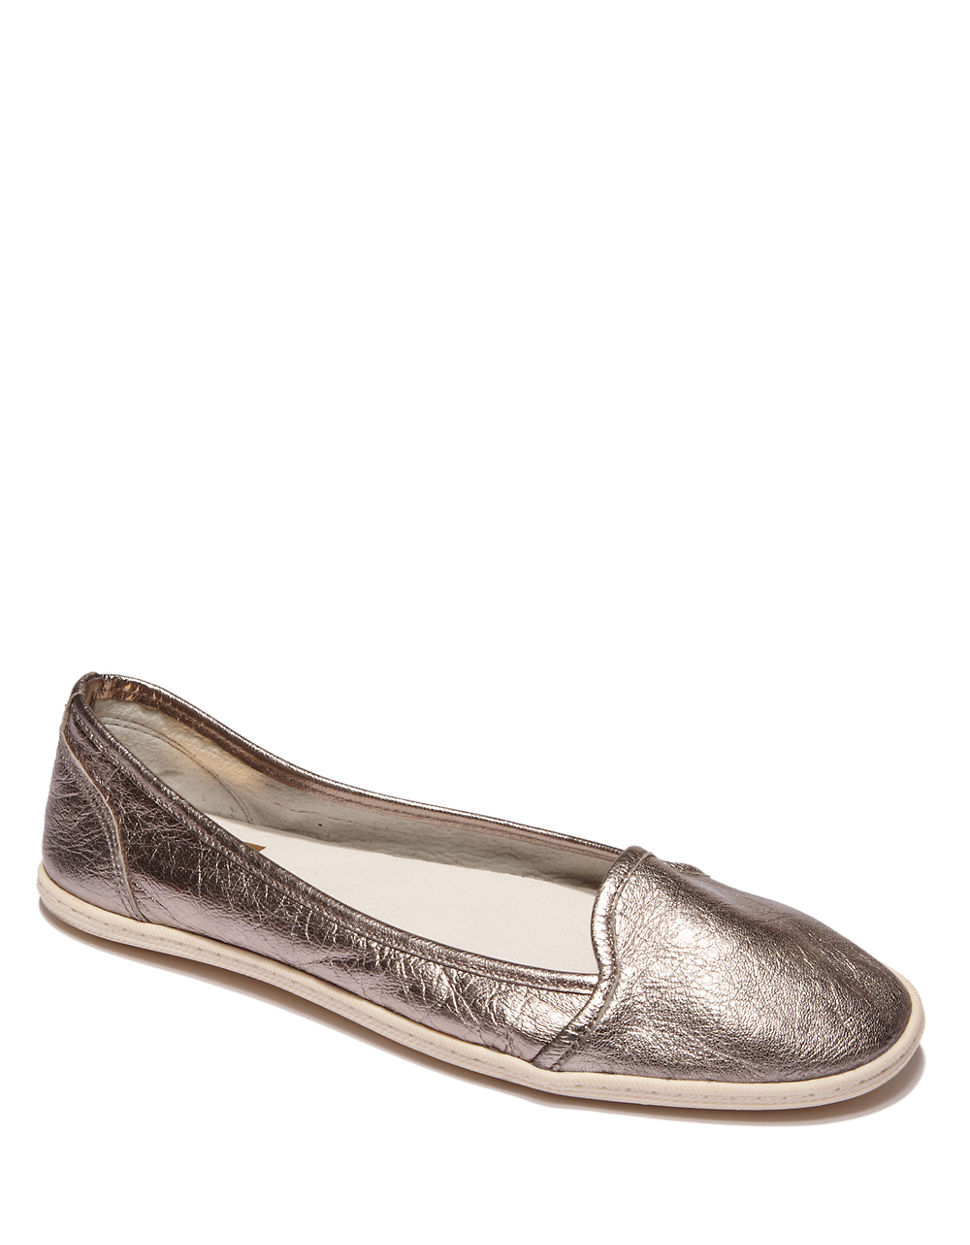 Dv By Dolce Vita Soloman Suede Flats in Silver | Lyst